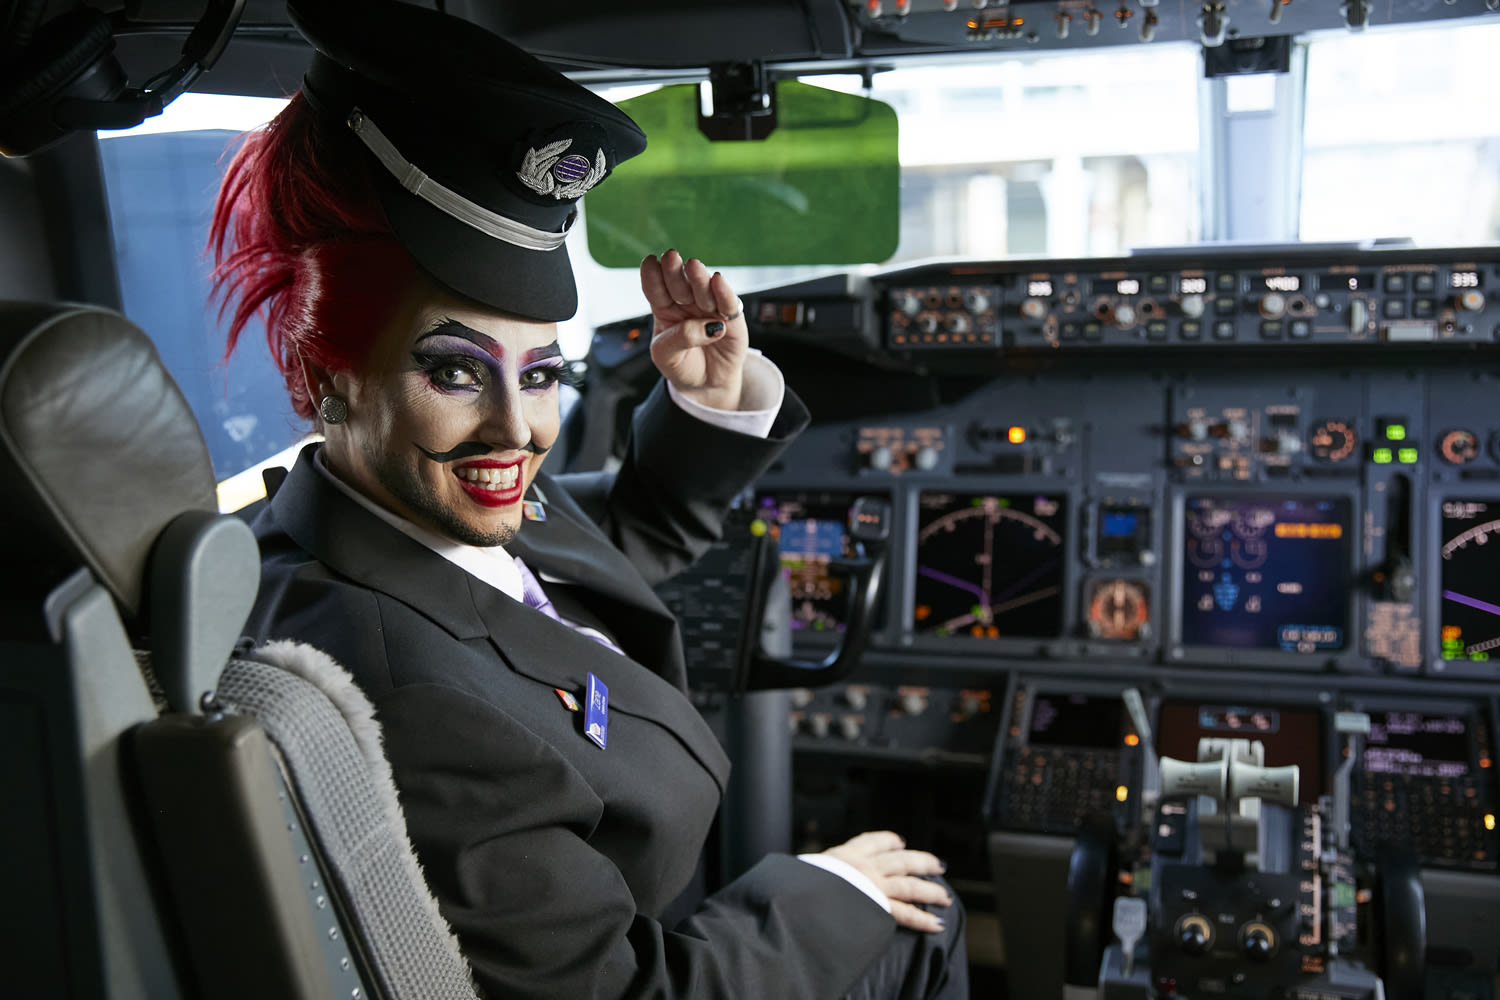 Drag Queen Sexy Galexy dressed as a pilot sitting in a cockpit